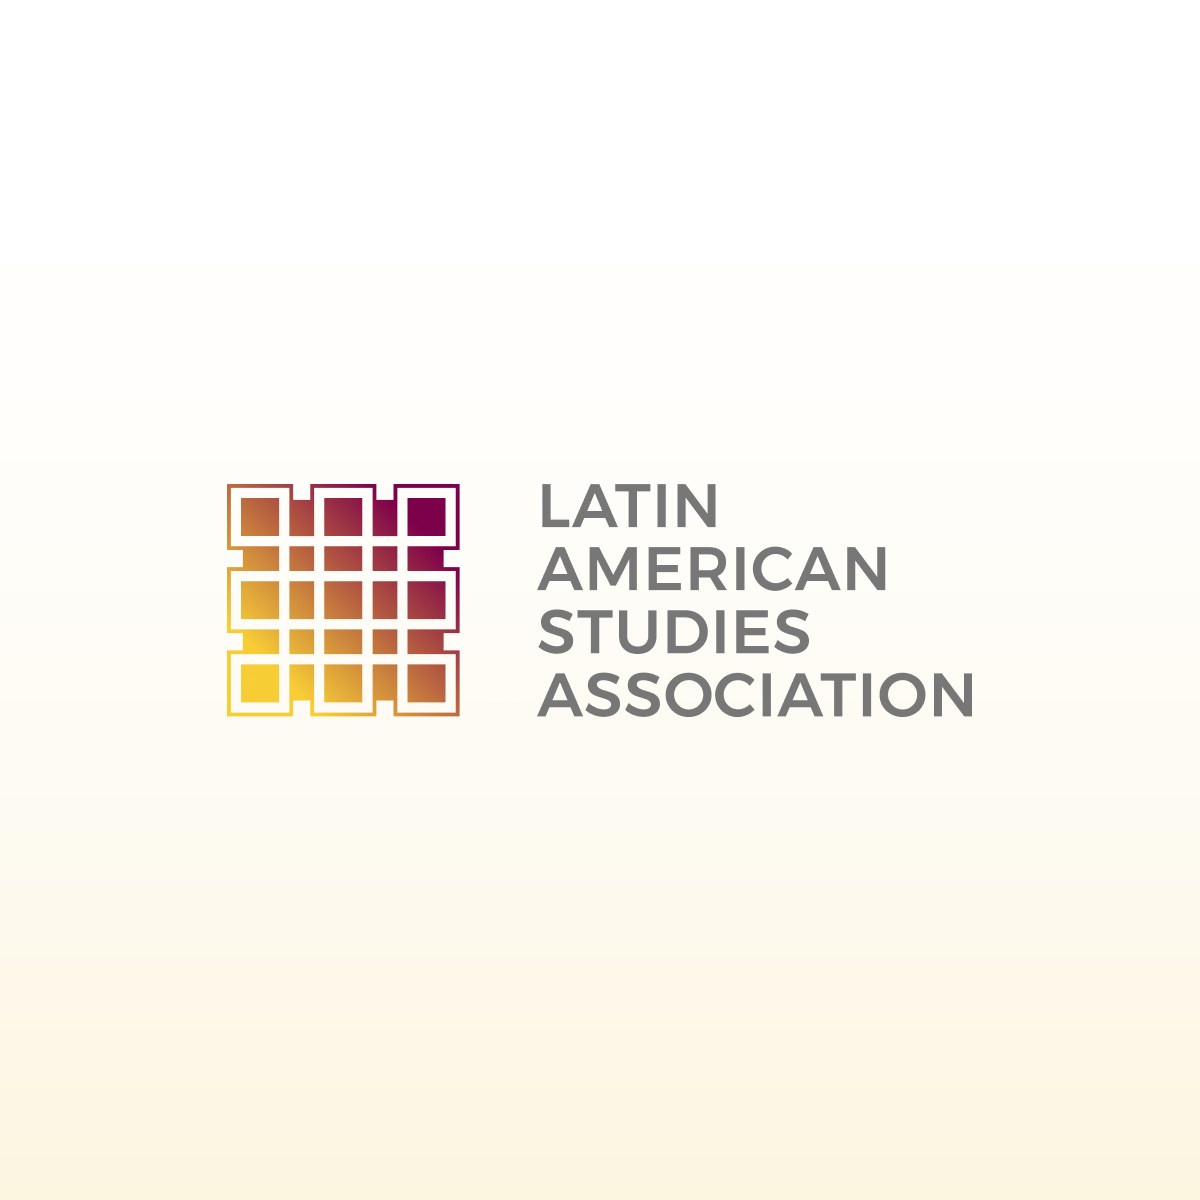 Latin American Research Review (LARR)